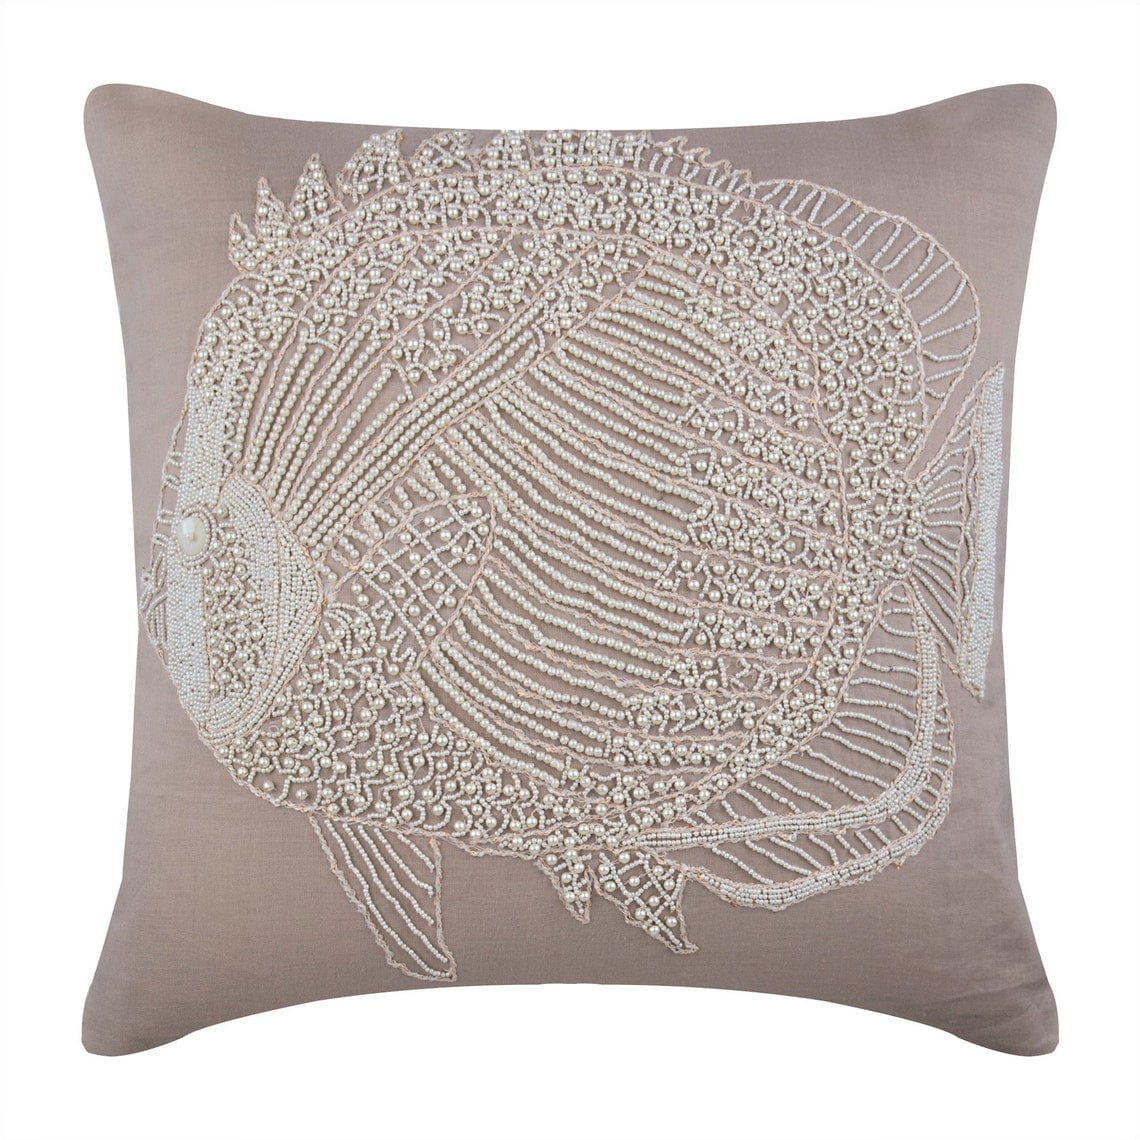 Decorative Natural Beige Euro Pillow Shams 26x26 inch (65x65 cm), Linen  Euro Size Pillow Shams, Sea Creatures, Starfish, Mother Of Pearl, Beach  Style European - Starfish Coated Pearl 